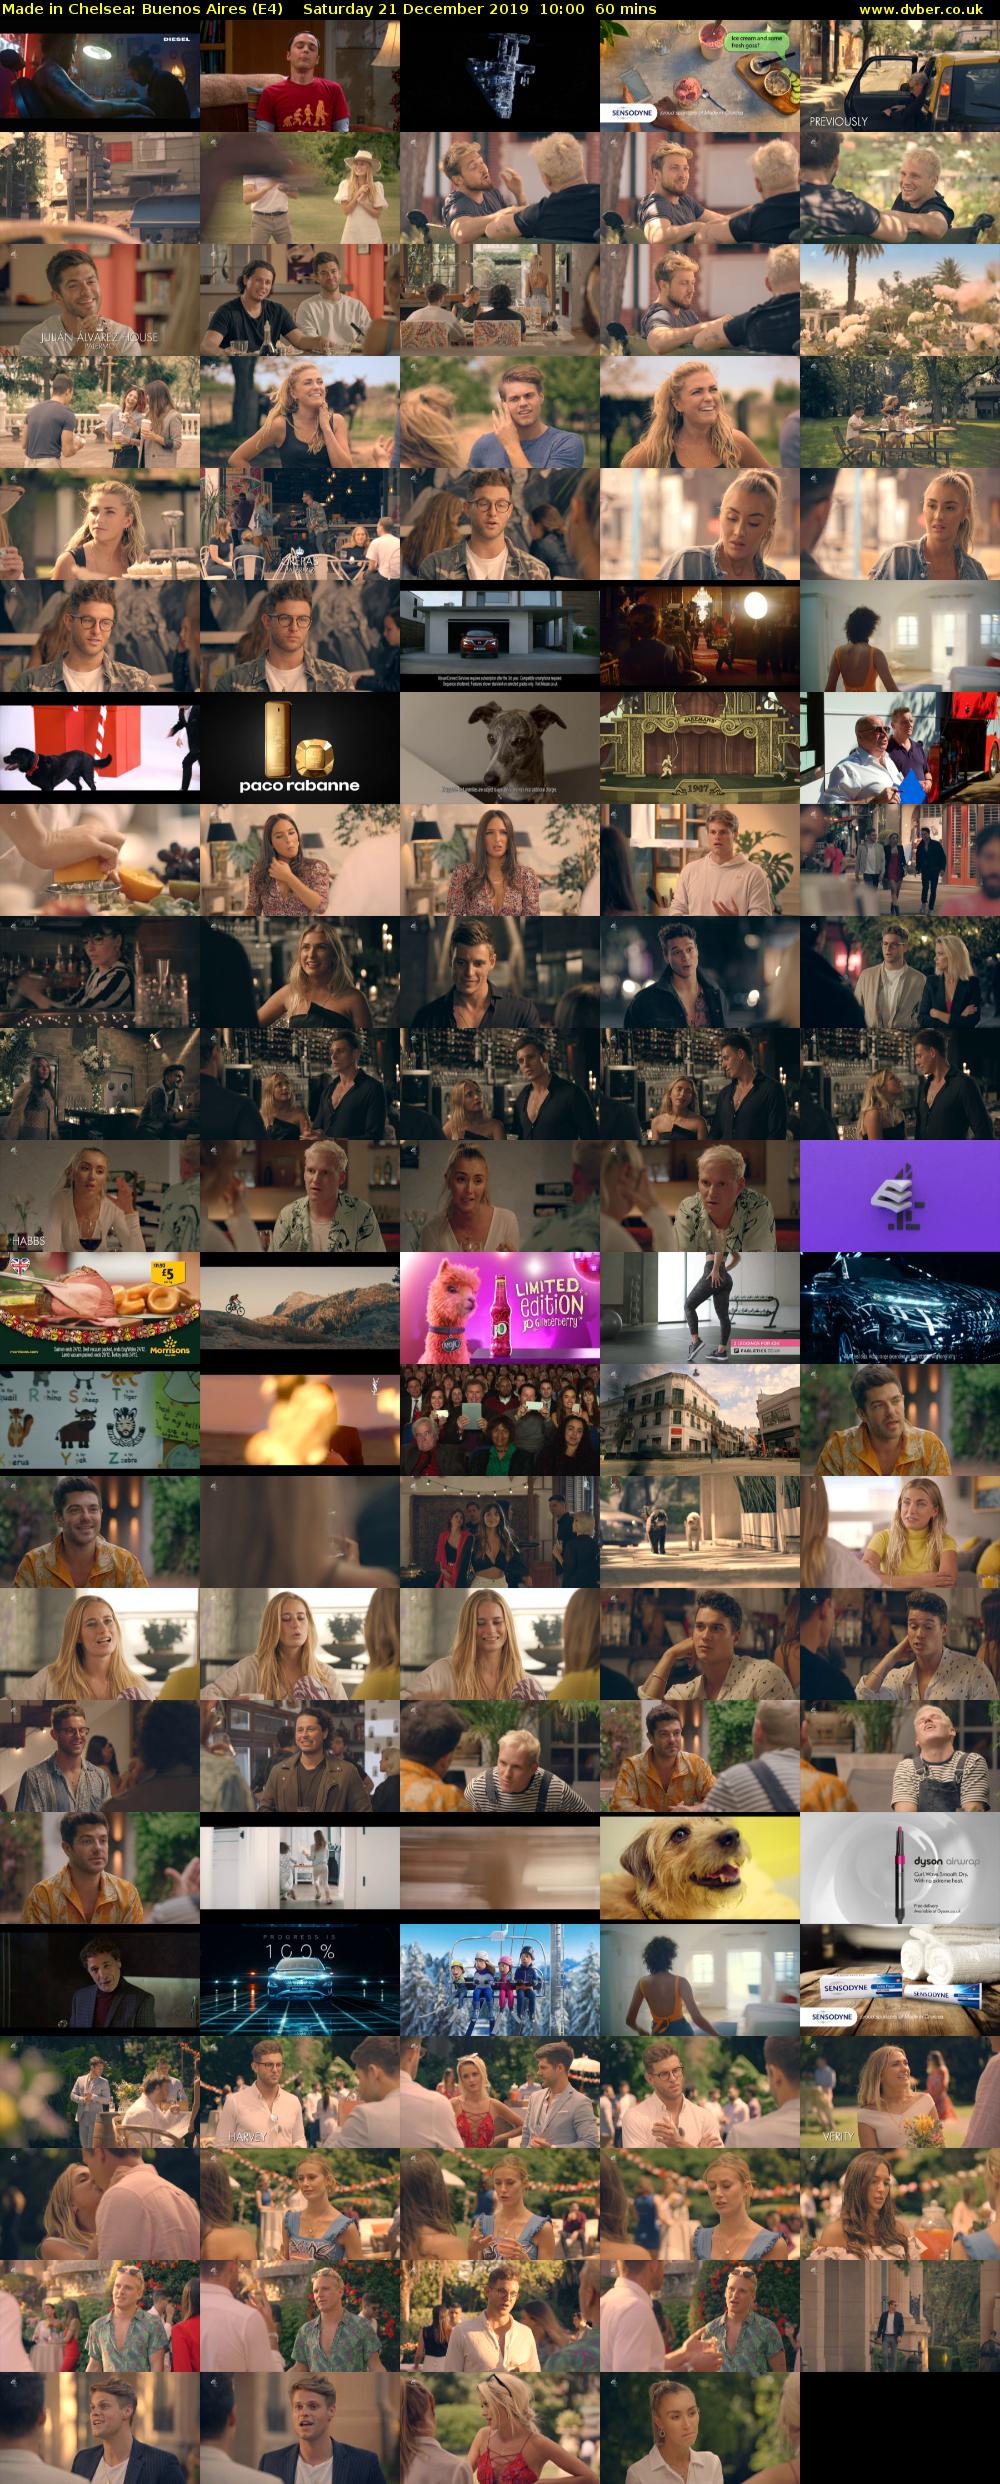 Made in Chelsea: Buenos Aires (E4) Saturday 21 December 2019 10:00 - 11:00